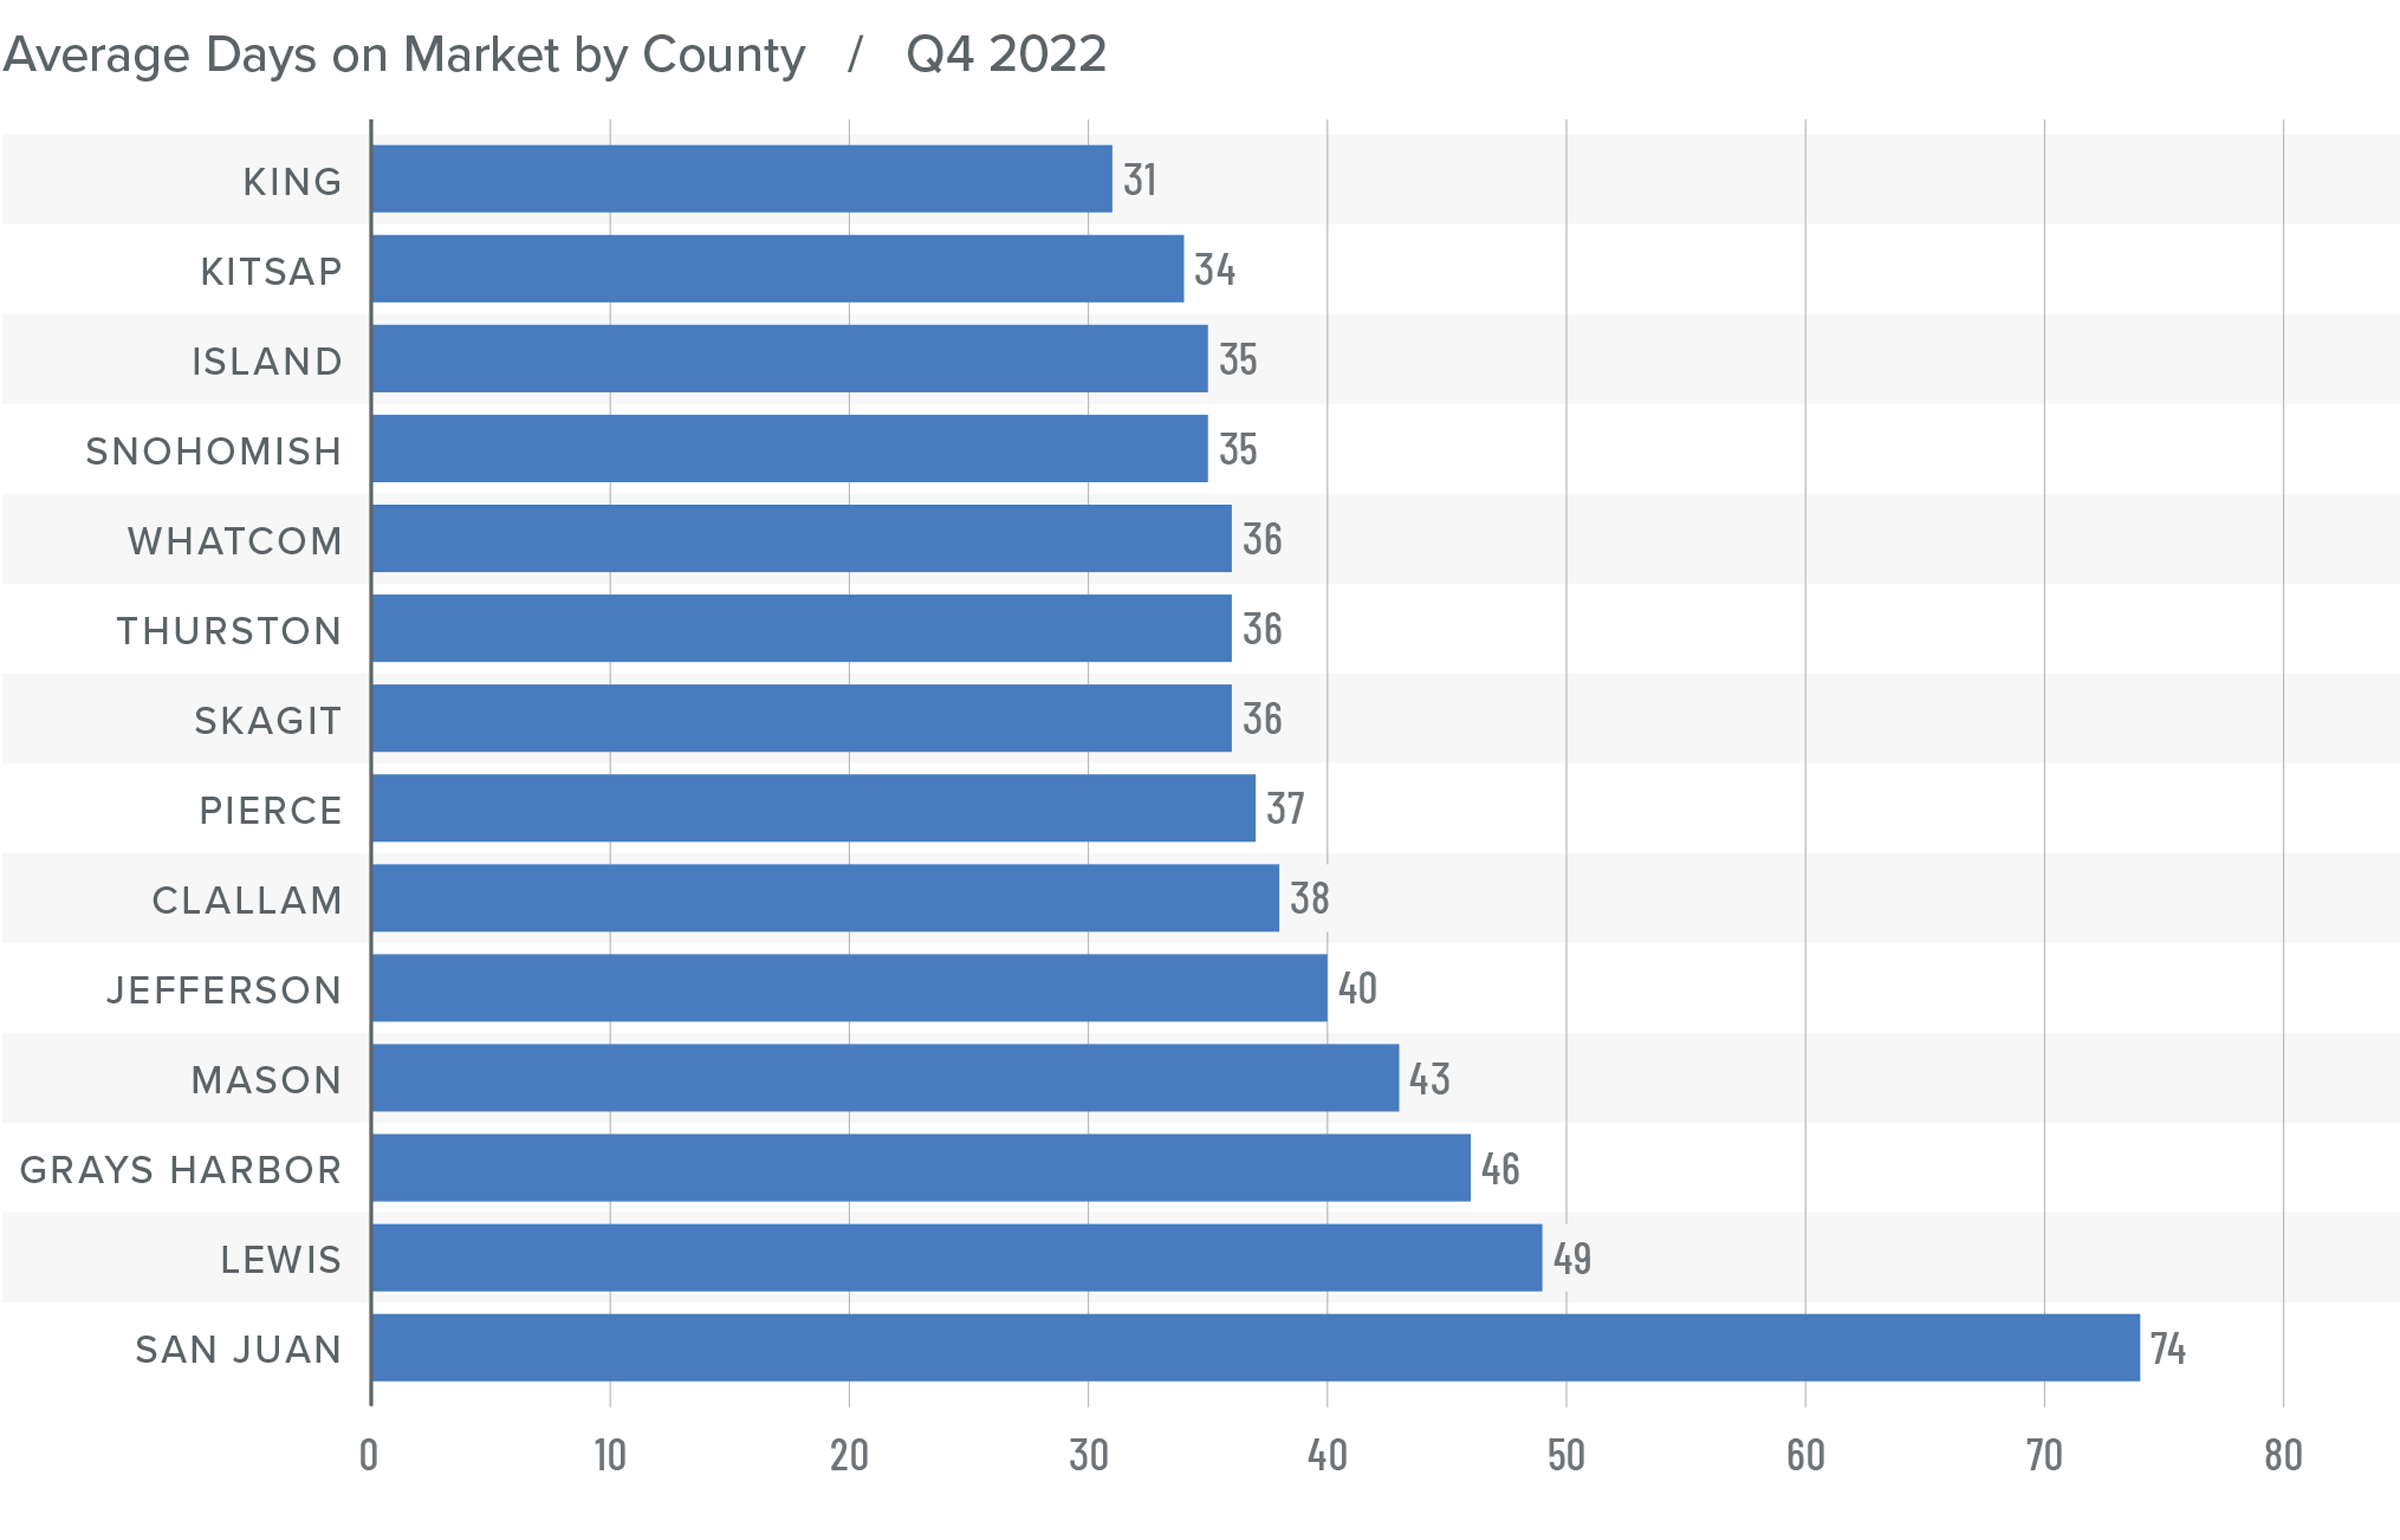 A bar graph showing the average days on market for homes in various counties in Western Washington for Q4 2022. King County has the lowest DOM at 31, followed by Kitsap at 45, Island and Snohomish at 35, Whatcom, Thurston, and Skagit at 36, Pierce at 37, Clallam at 38, Jefferson at 40, Mason at 43, Grays Harbor at 46, Lewis at 49, and San Juan at 74.